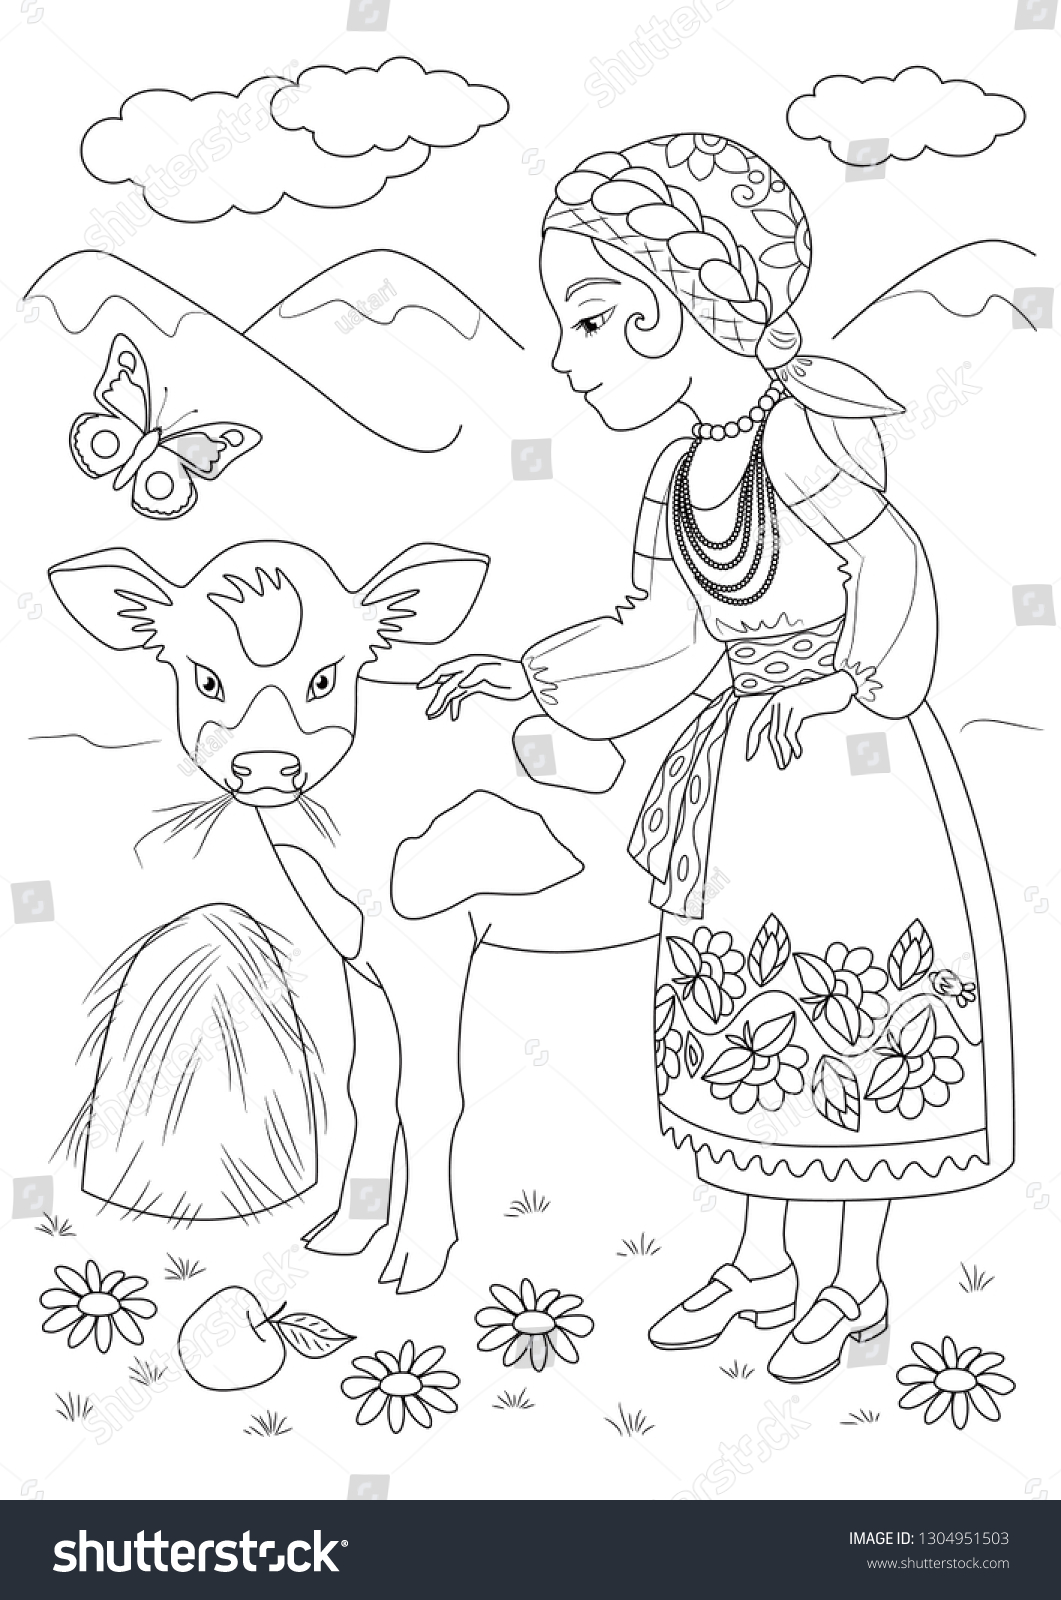 Girl village coloring page outline cartoon stock vector royalty free